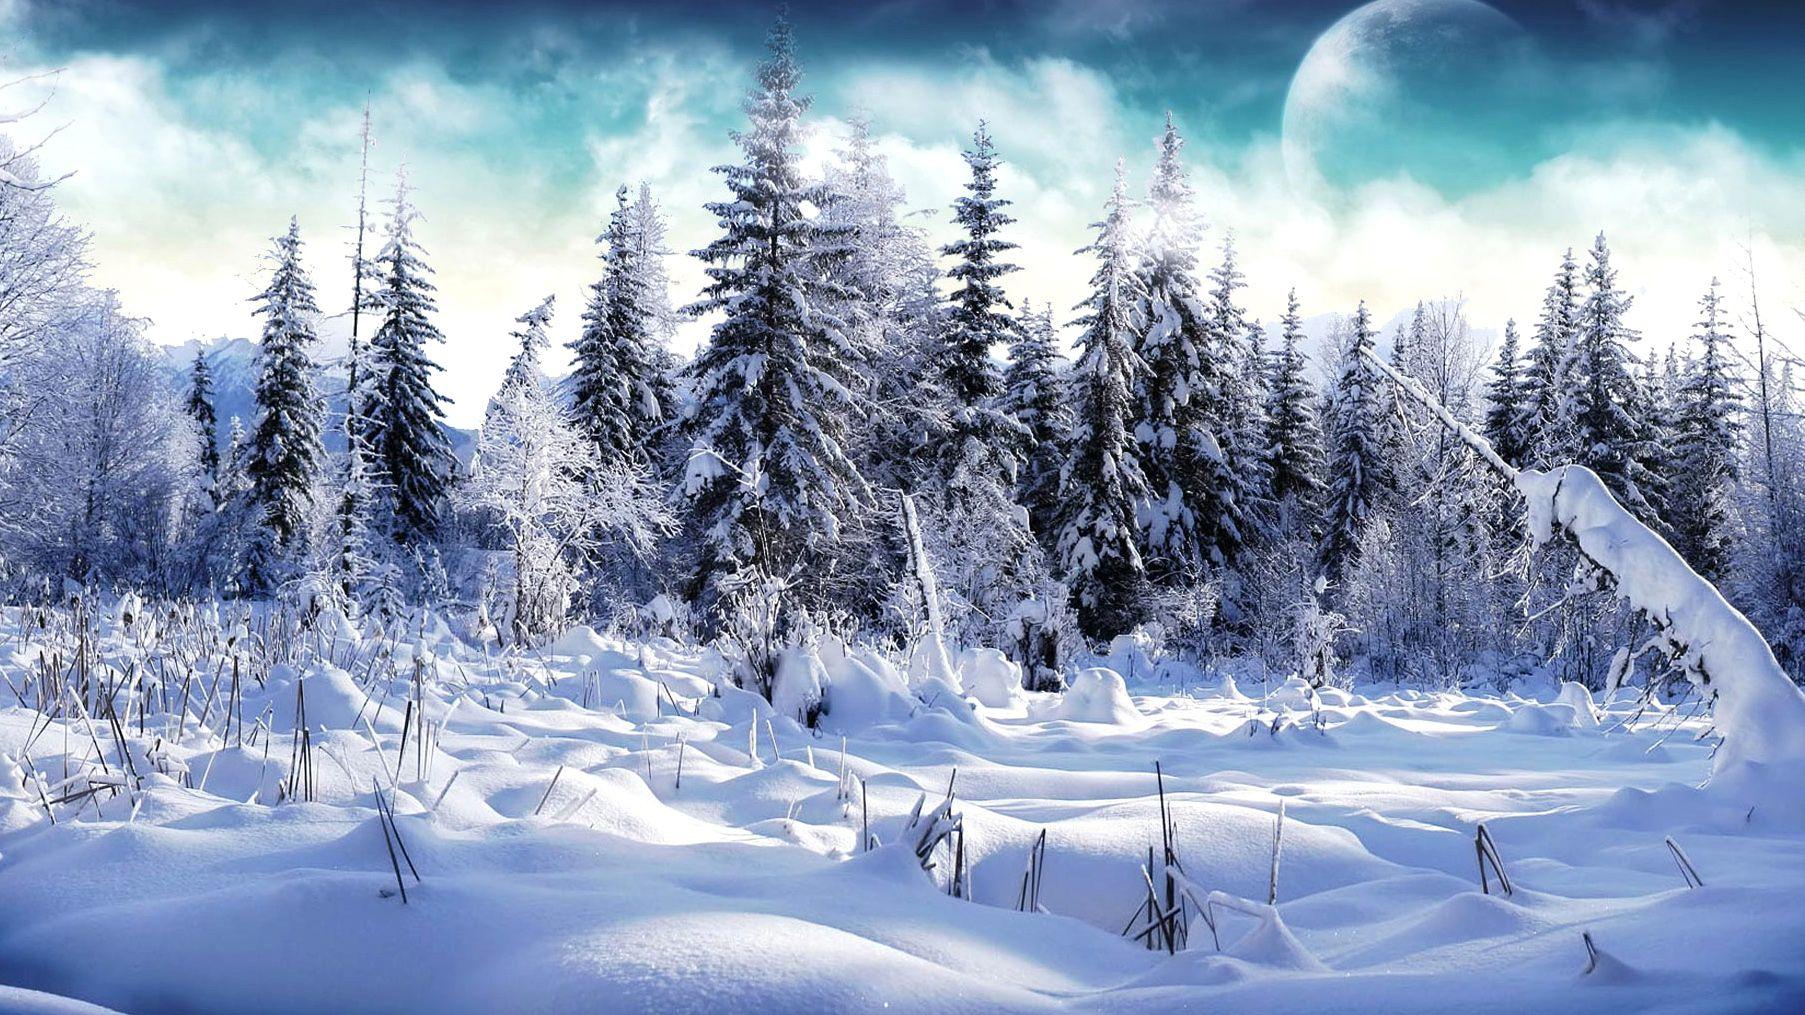 Winter, Snowy, Forest, Cool Nature Wallpaper, Organic, Plants